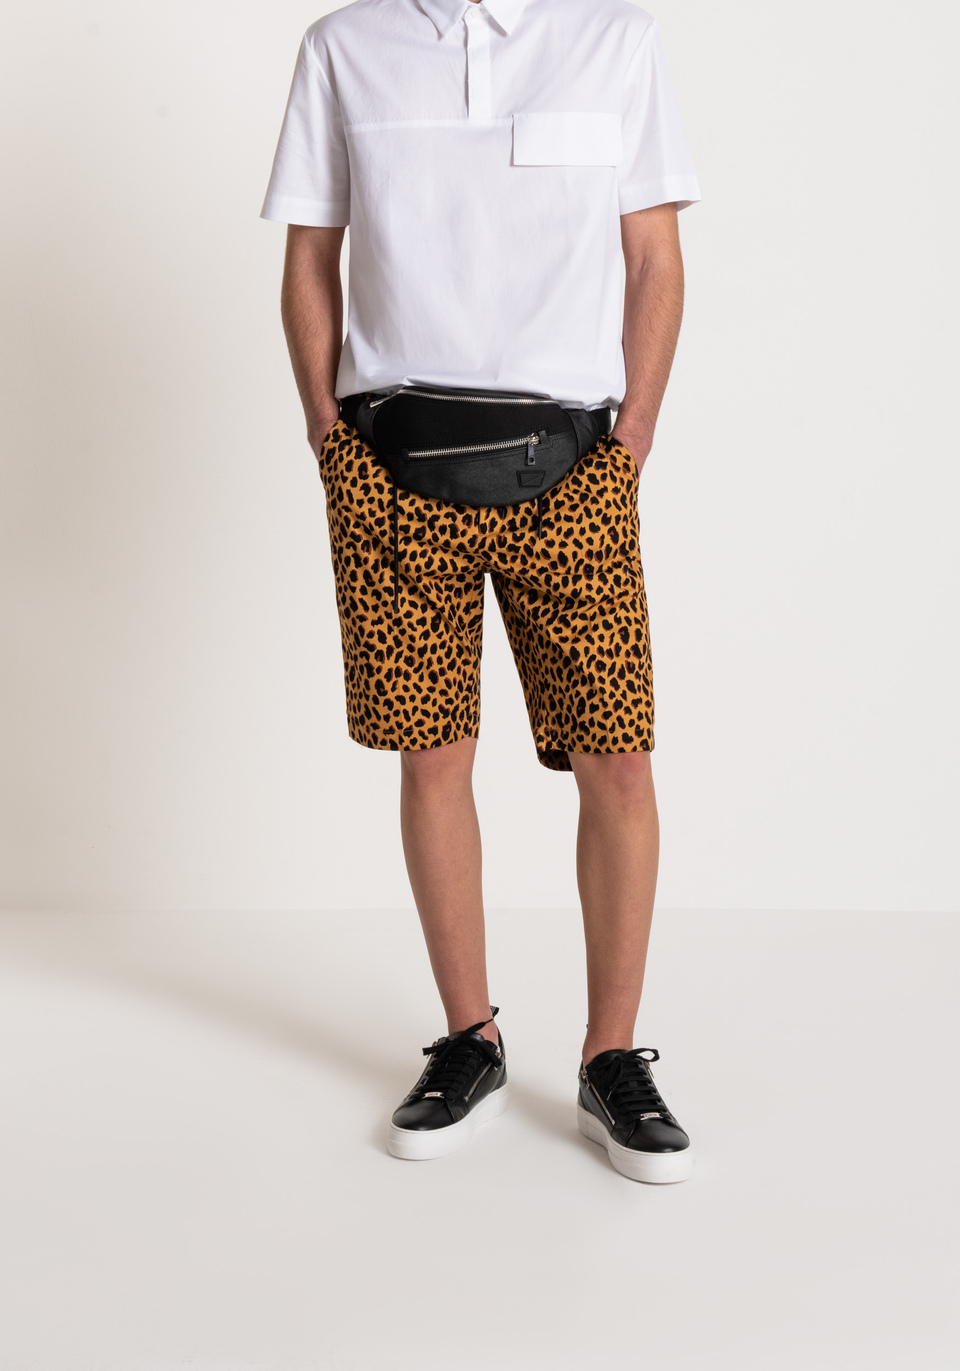 CARROT-CUT “RALPH” SHORTS IN ANIMAL-PATTERNED COTTON - Antony Morato Online Shop